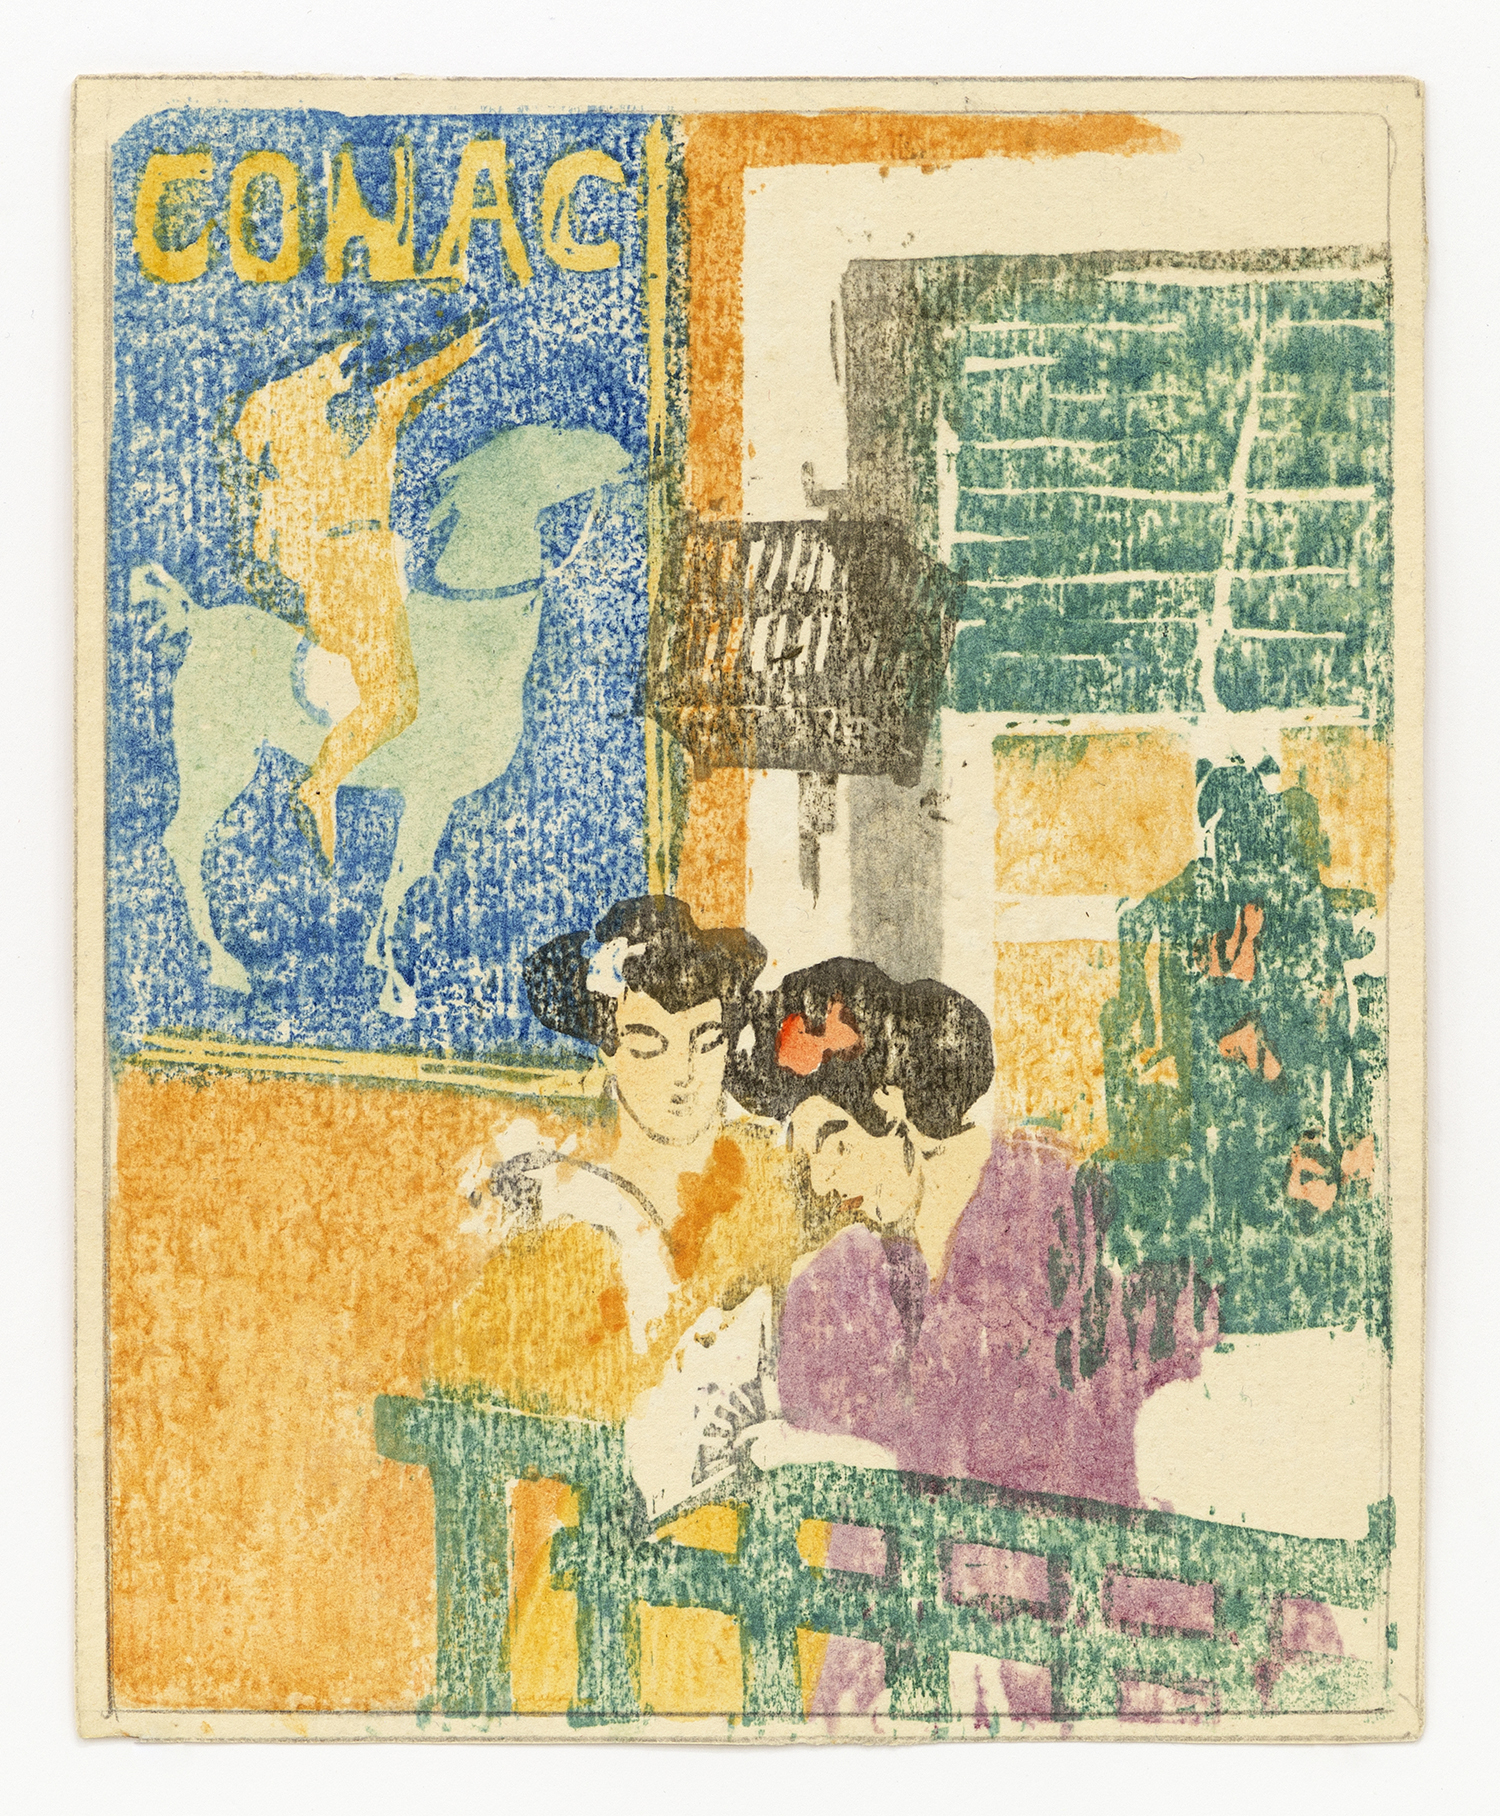 Untitled (two women under blue CONAC sign), 1903-12, Color woodblock, 7 1/4 x 5 7/8 inches (18.4 x 14.9 cm), Edition size unknown, rare